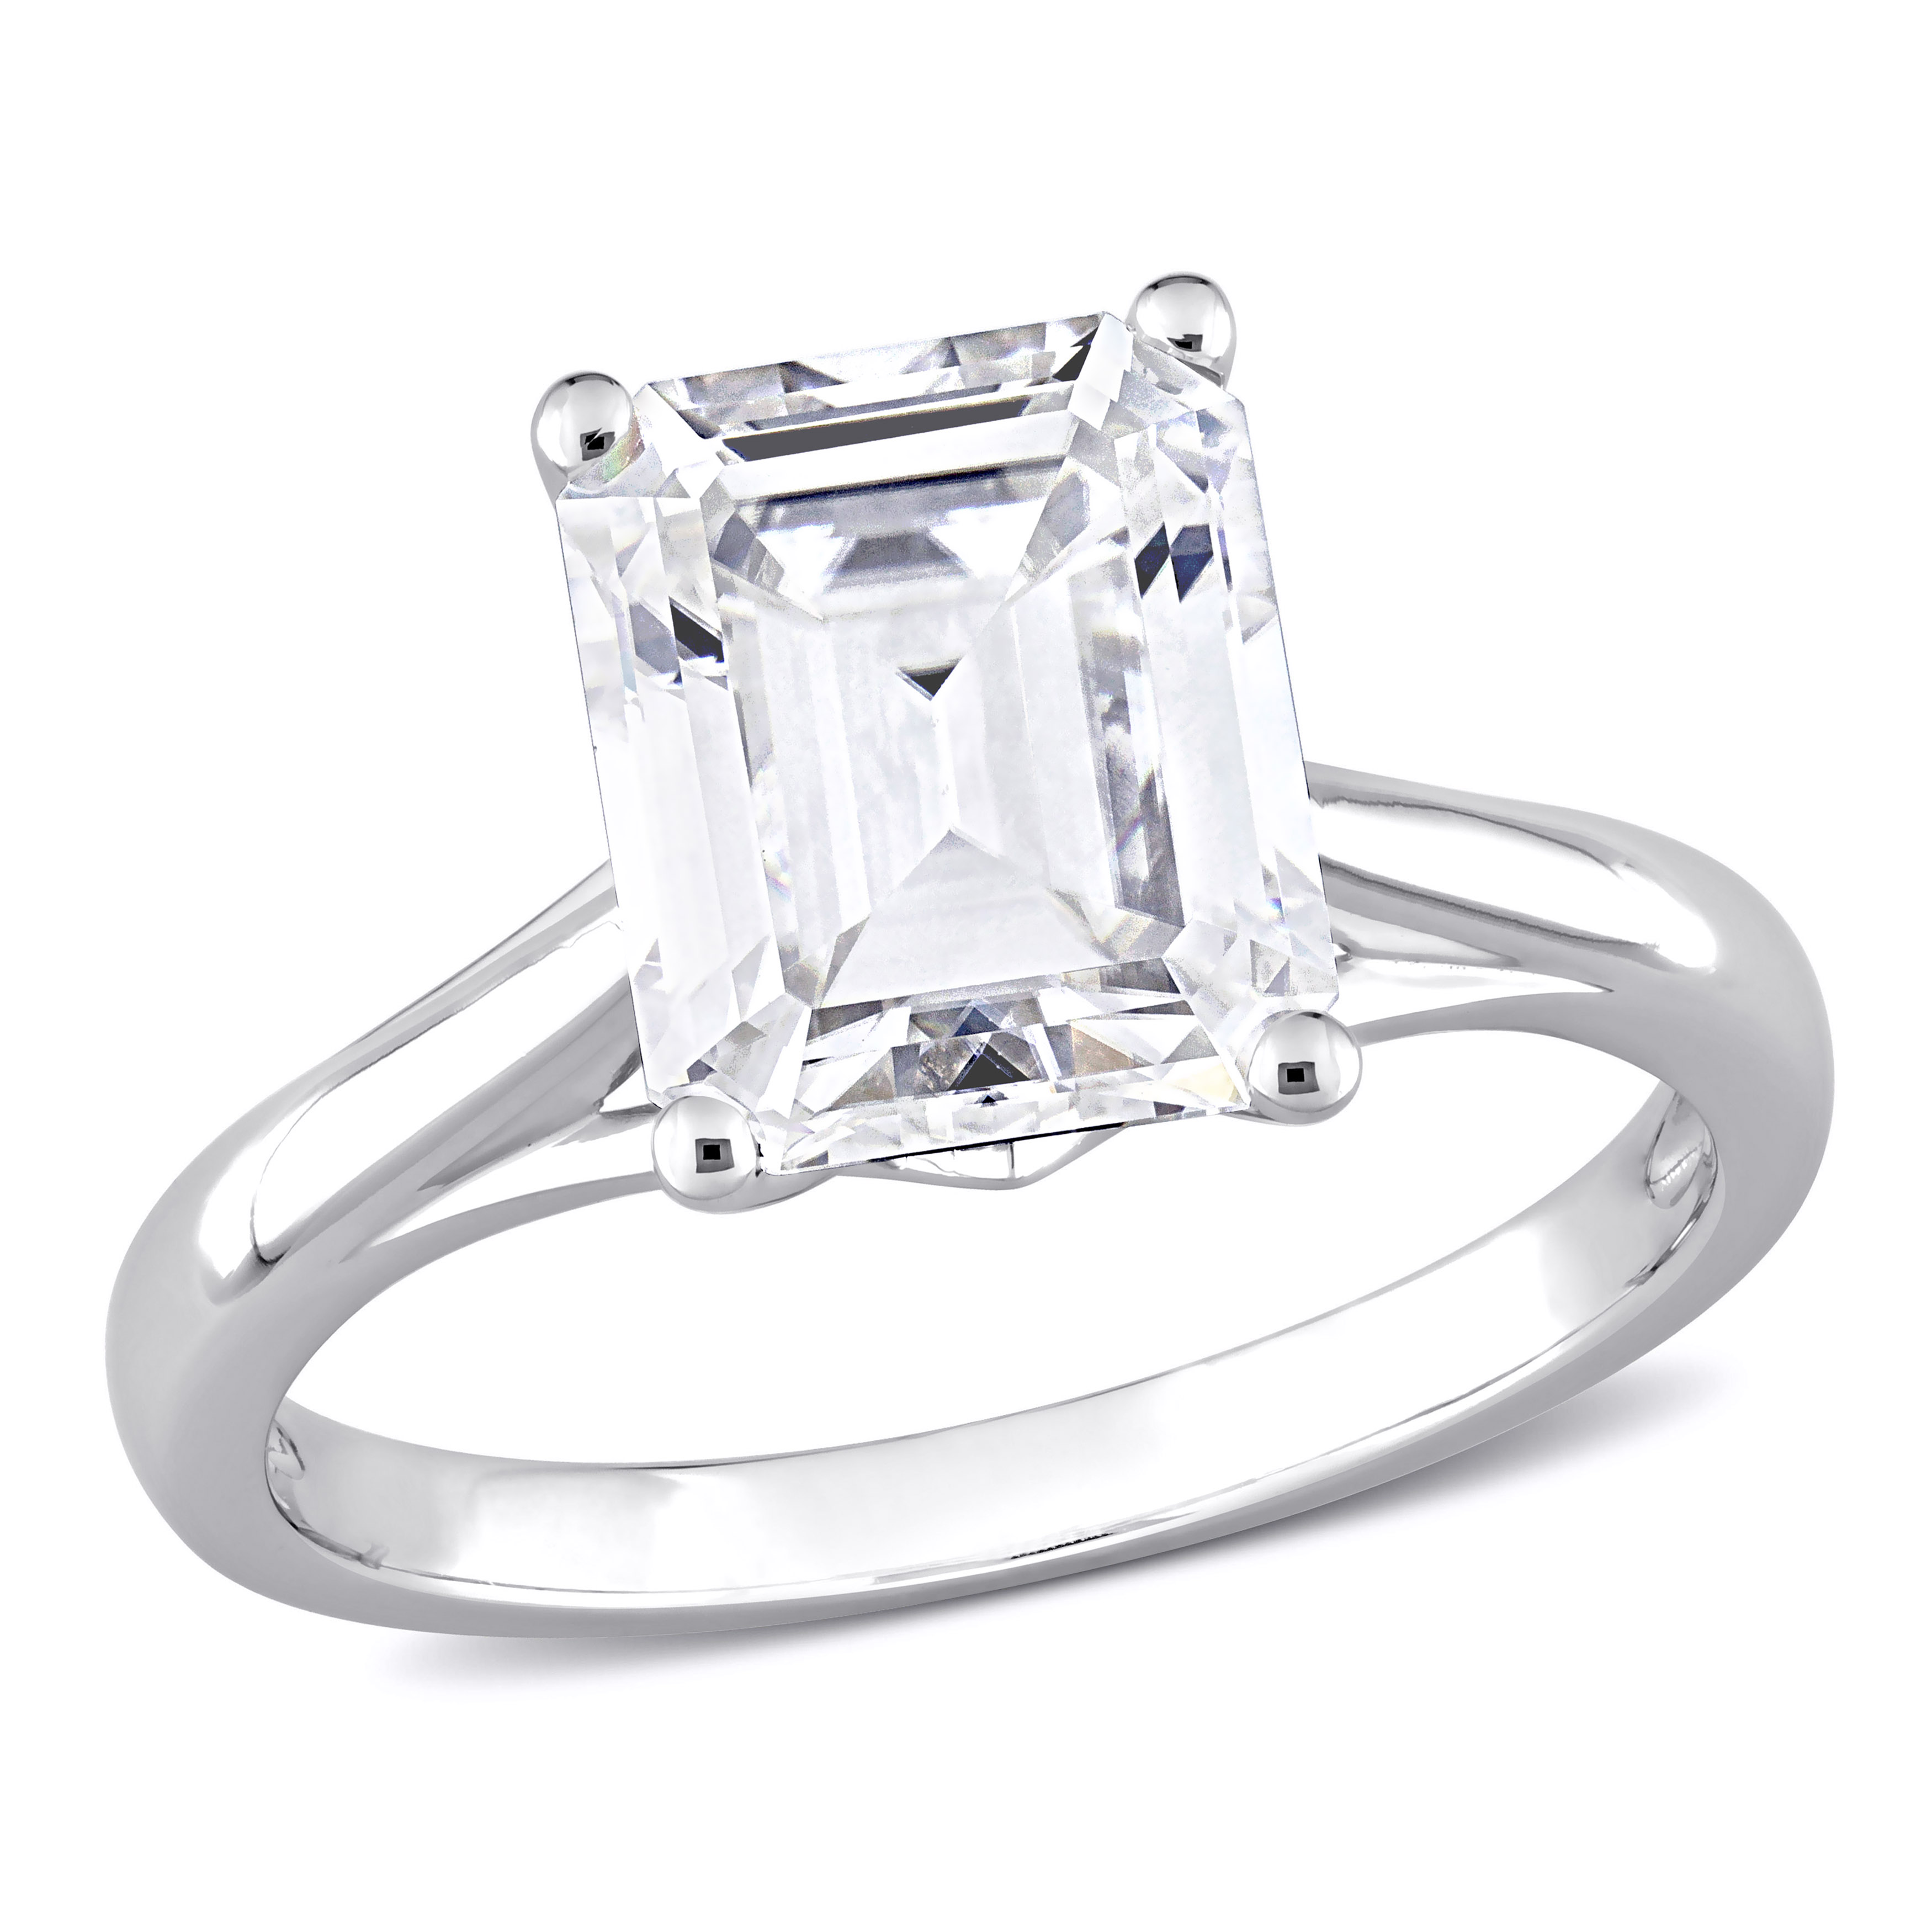 3 1/2 CT DEW Emerald Cut Created Moissanite Solitaire Ring in 10k White Gold